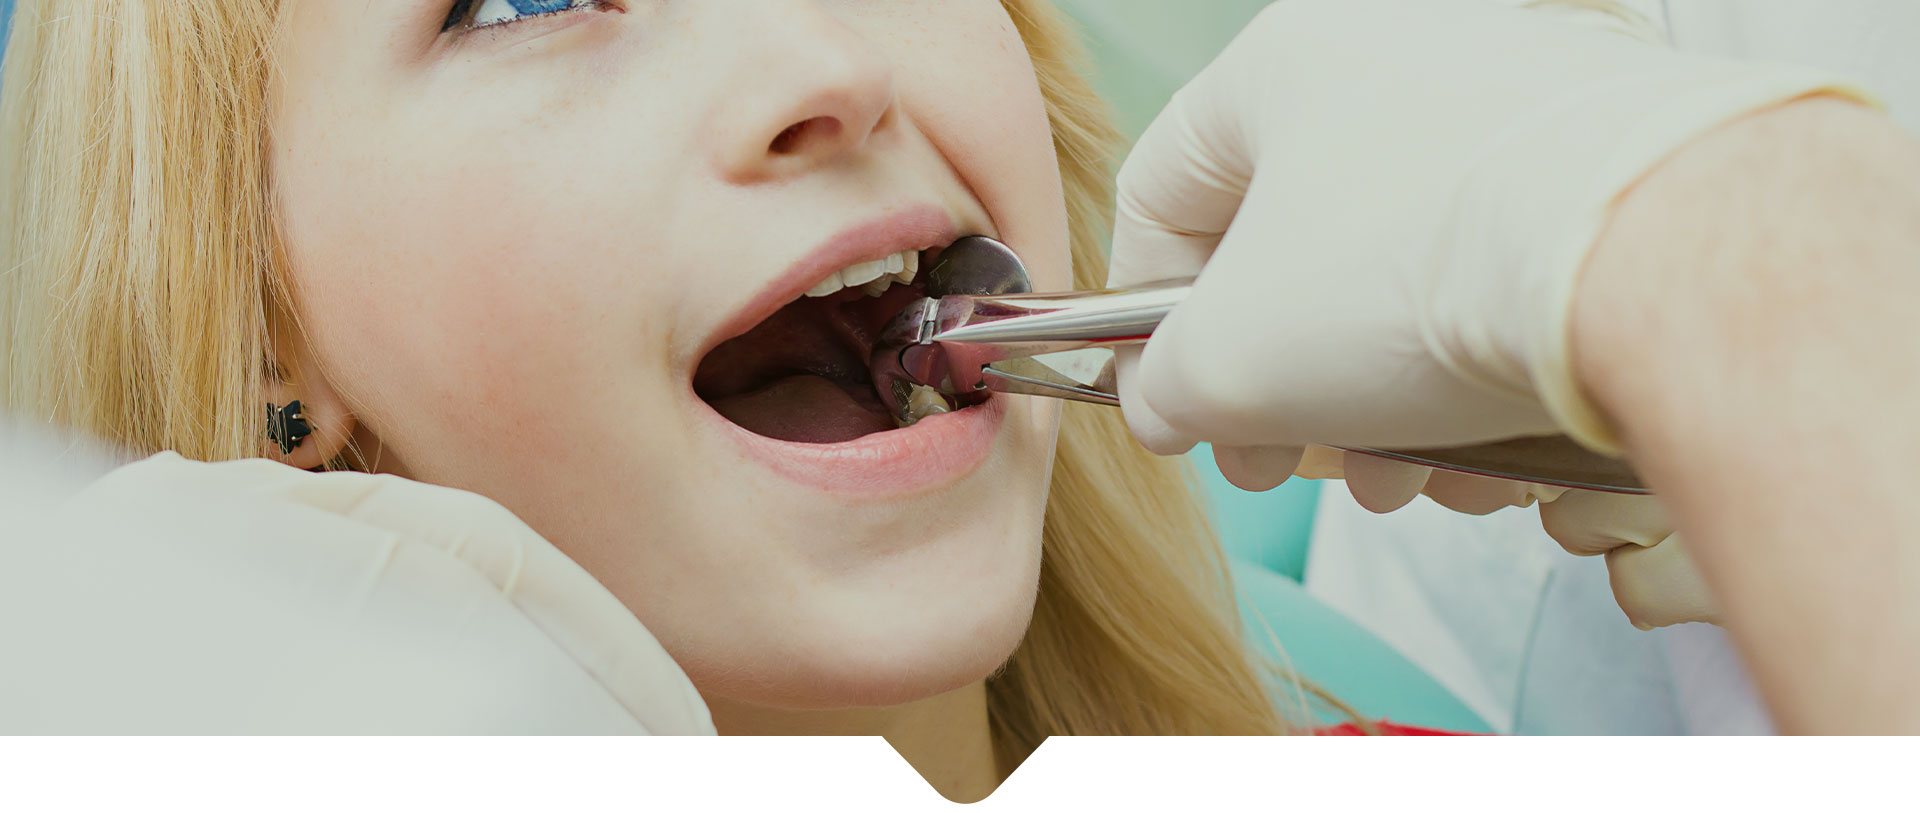 Doctor dentist performing extraction procedure with forceps removing patient tooth